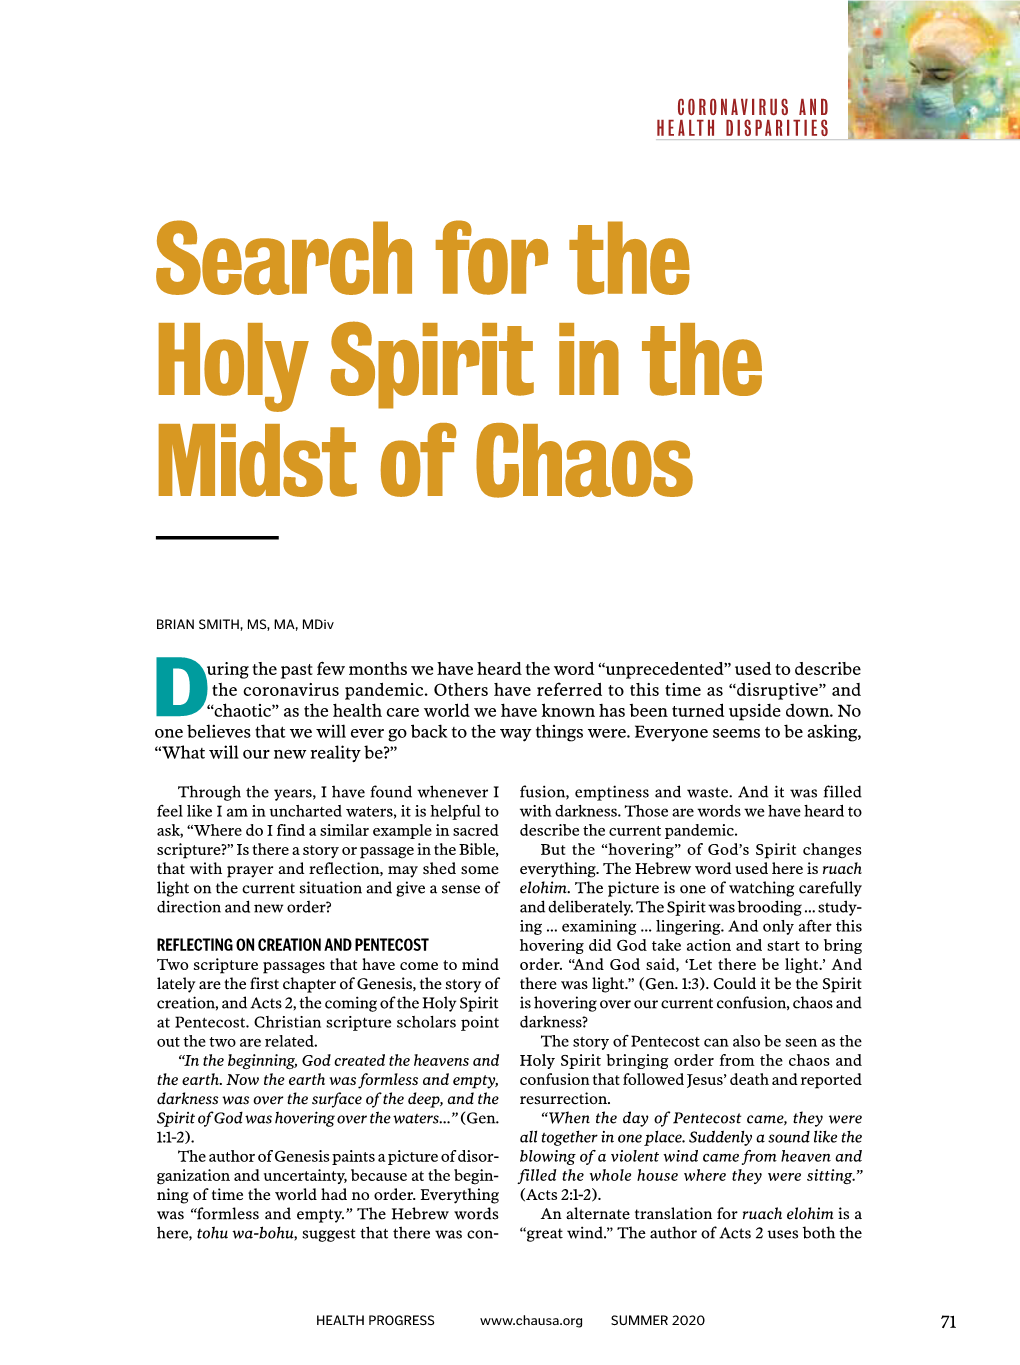 Search for the Holy Spirit in the Midst of Chaos